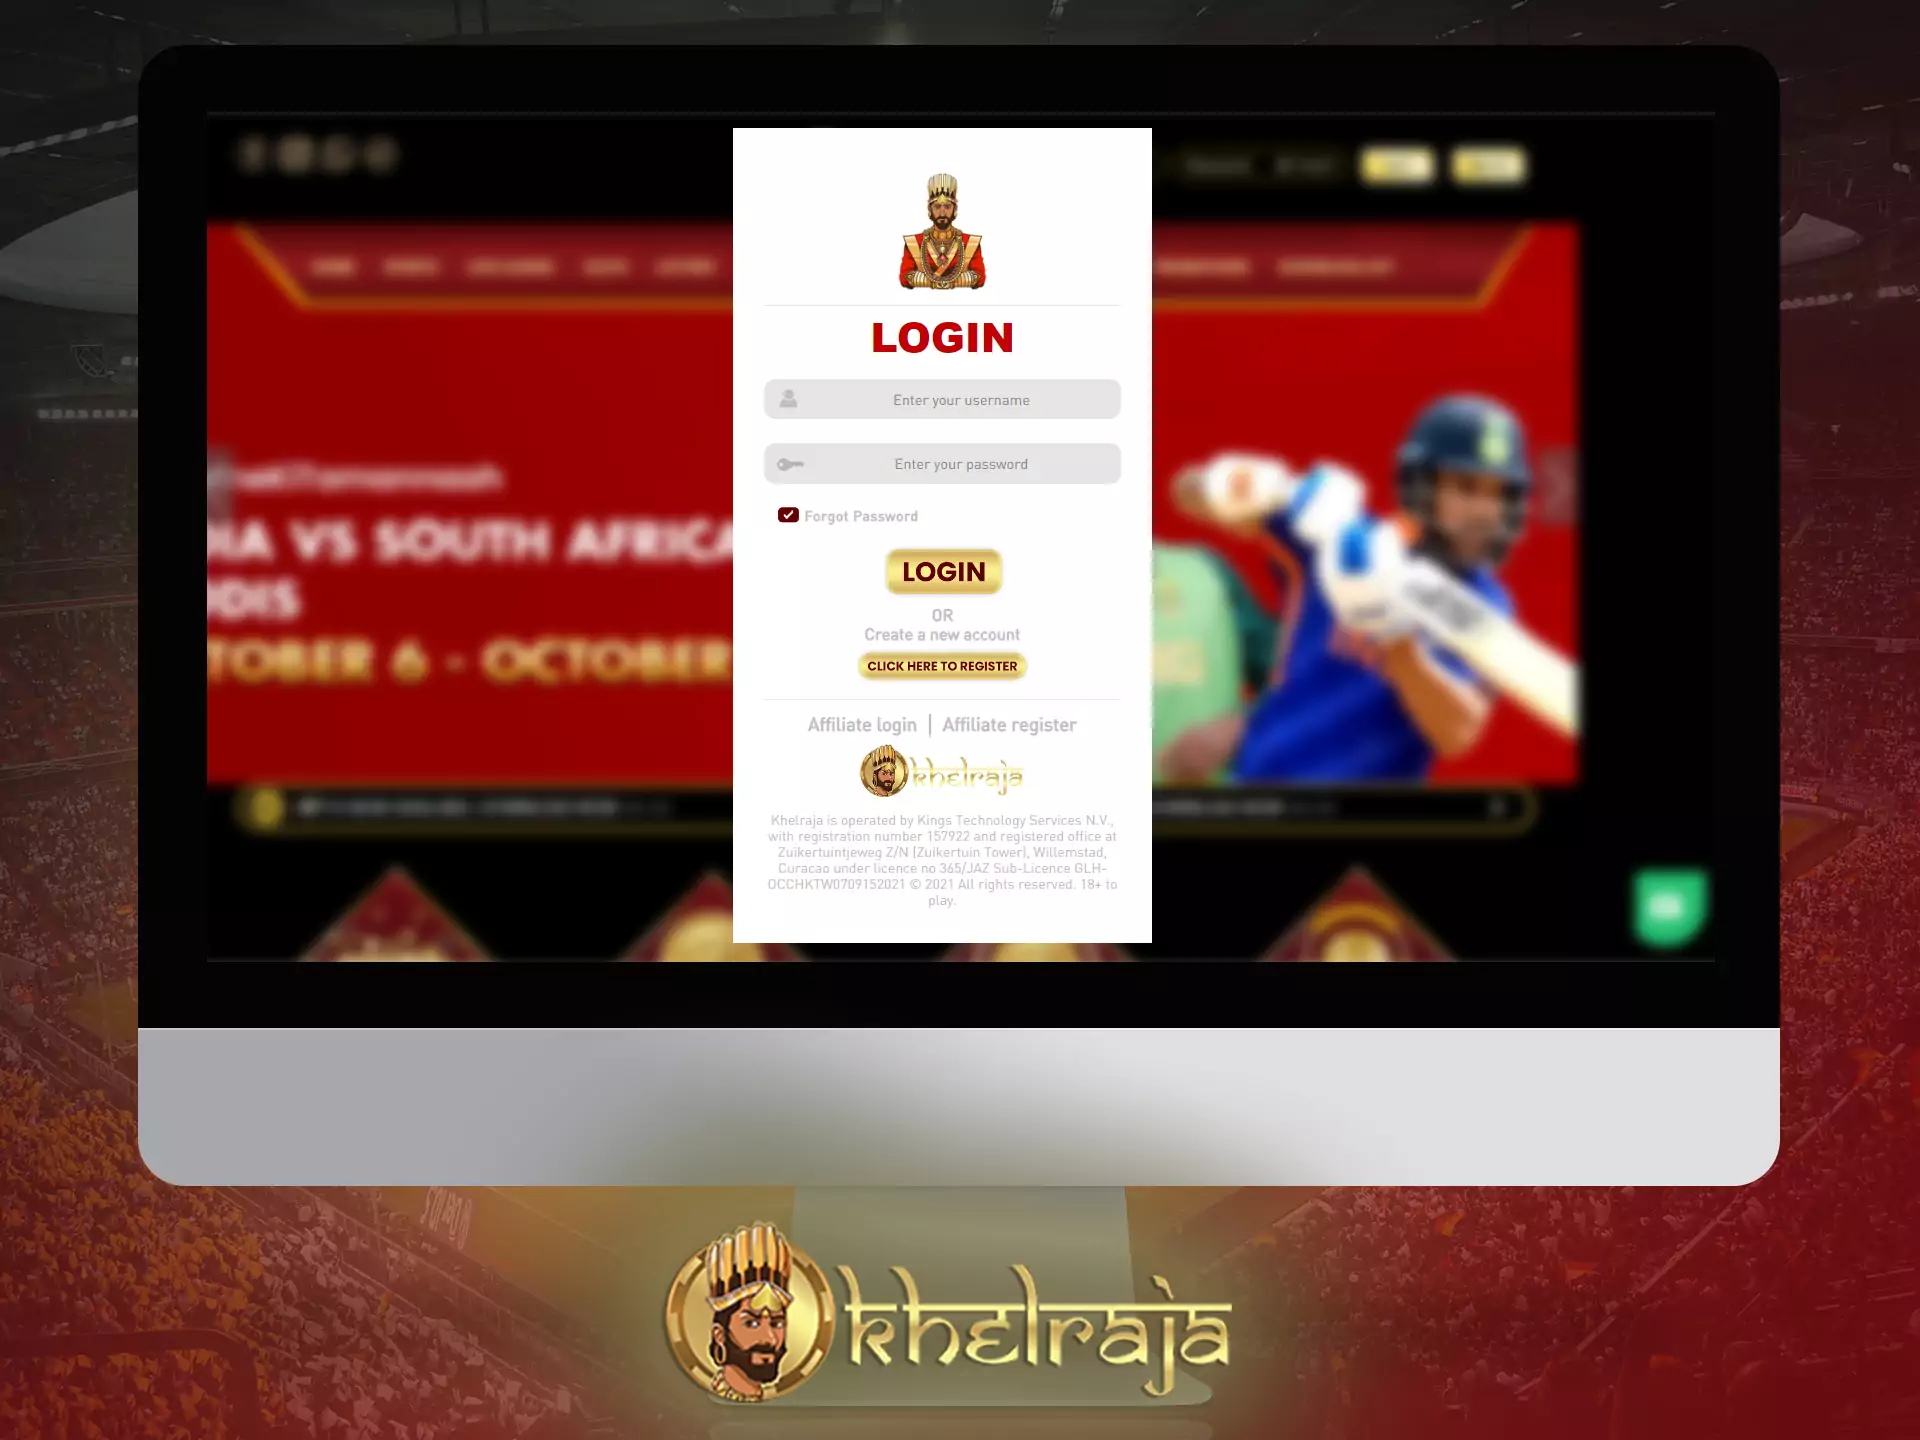 To start betting with Khelraja, you should log in.